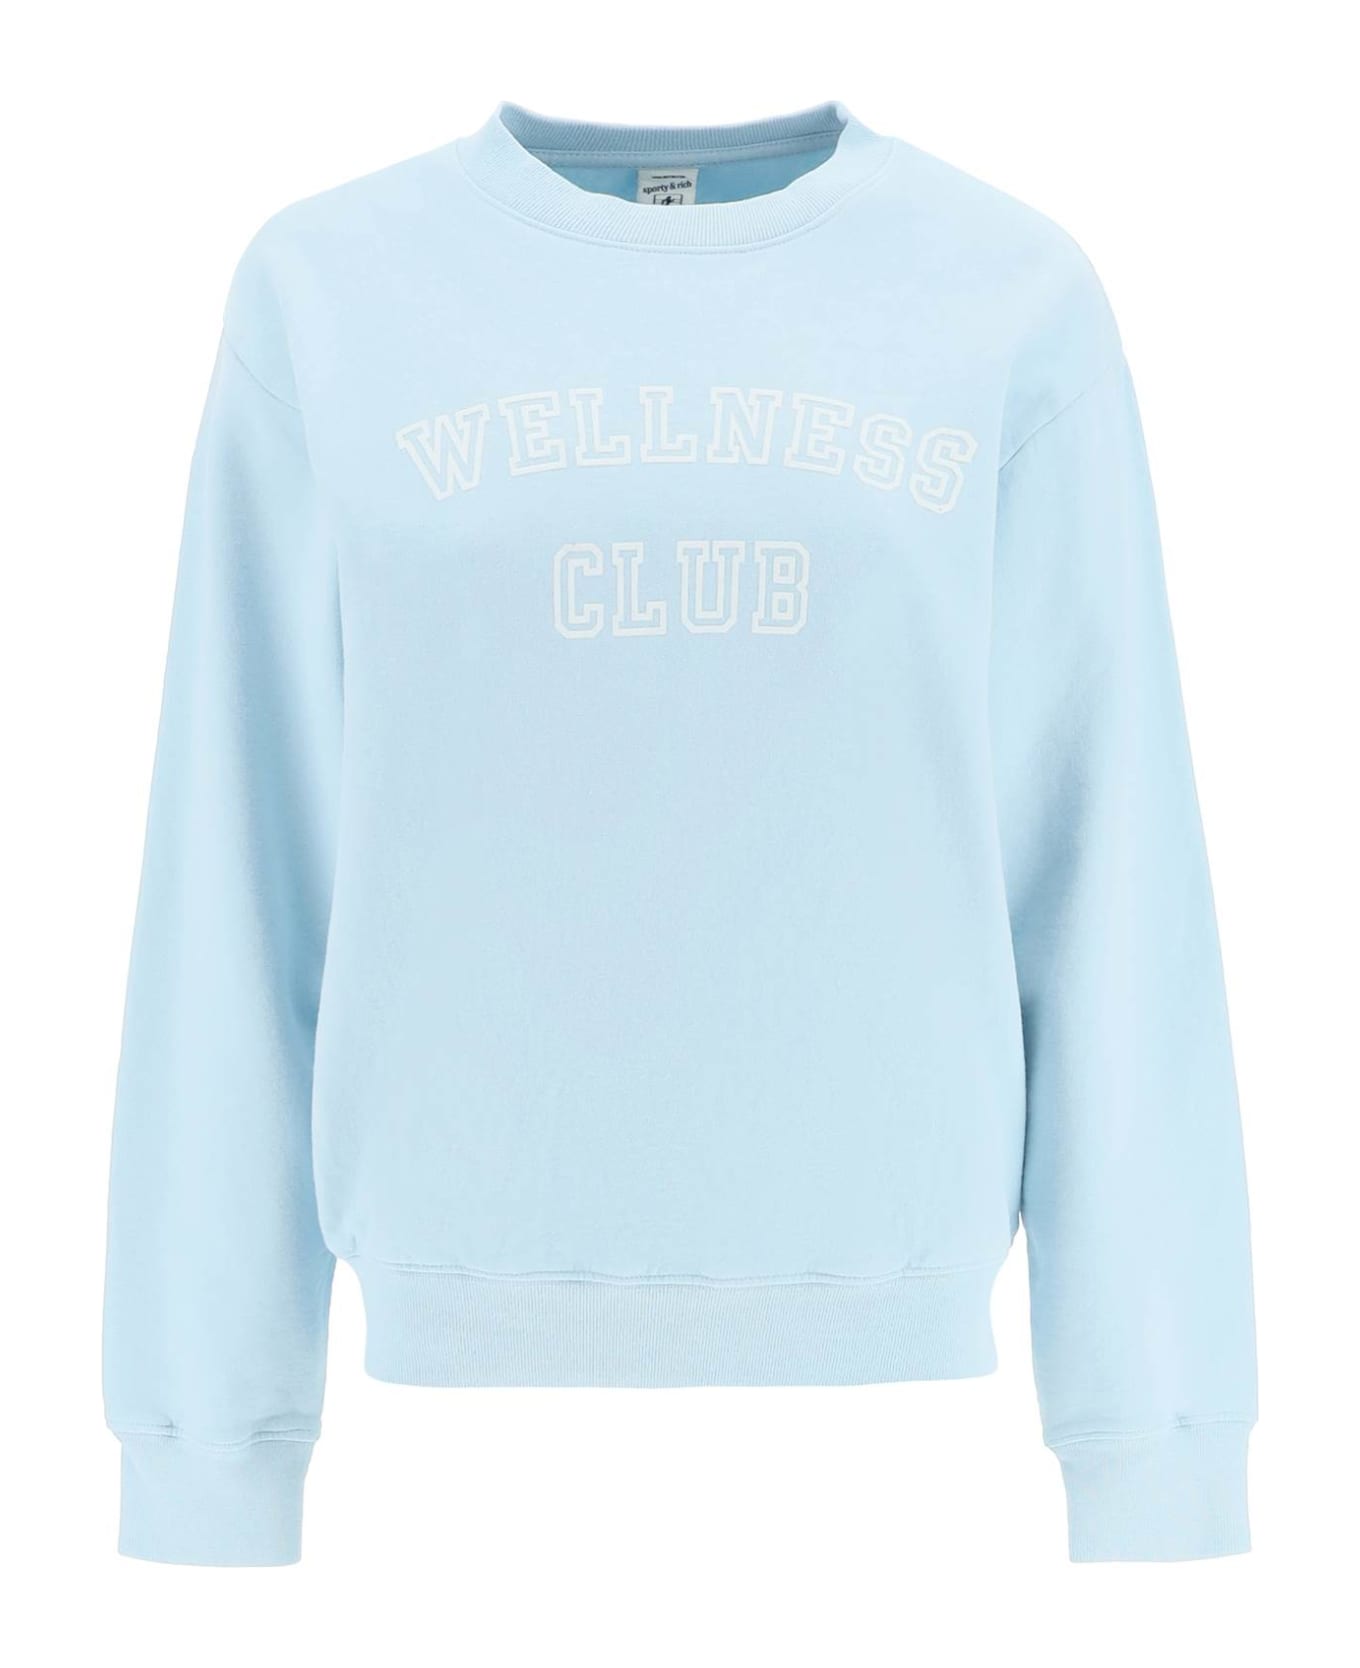 Sporty & Rich Crew-neck Sweatshirt With Lettering Print - BABY BLUE (Light blue)